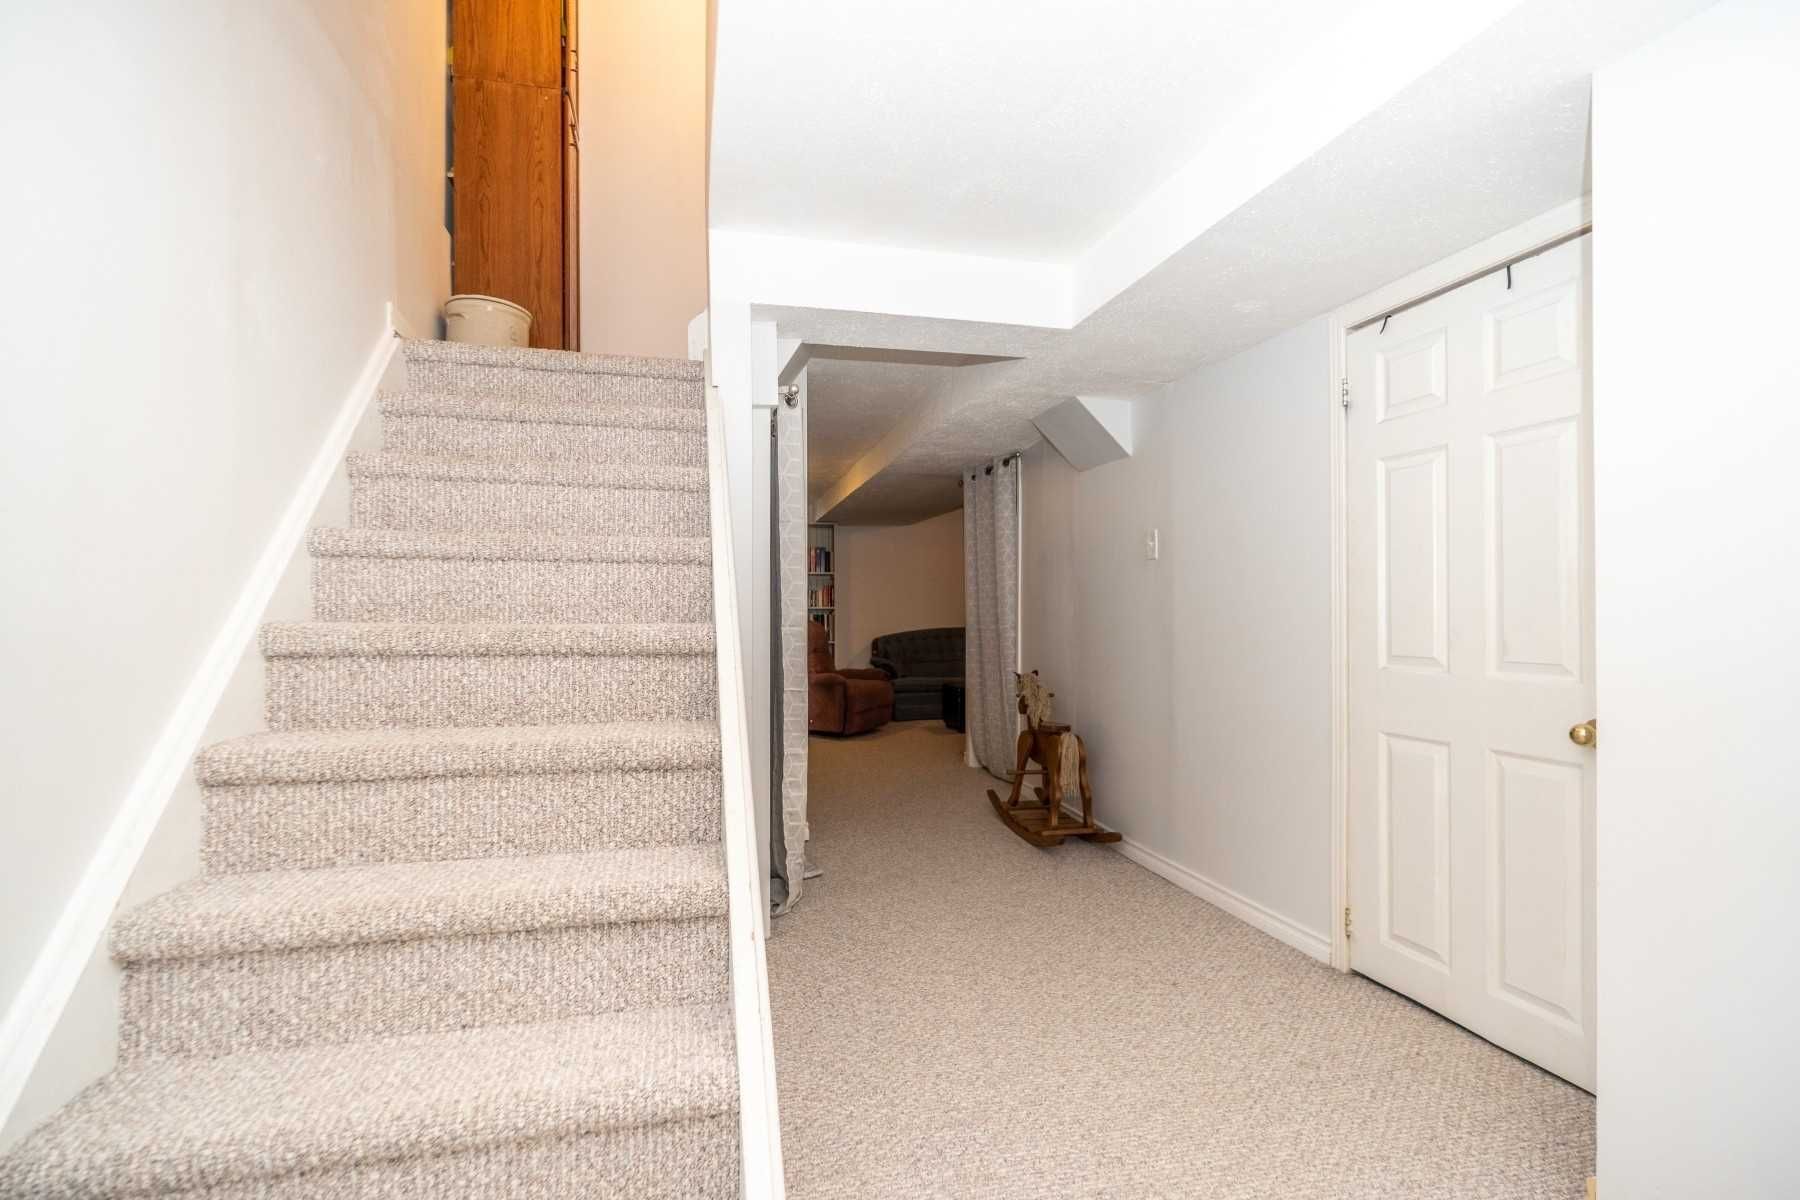 Photo 15: Photos: 21 Mandy Court in Whitby: Pringle Creek House (2-Storey) for sale : MLS®# E4720939